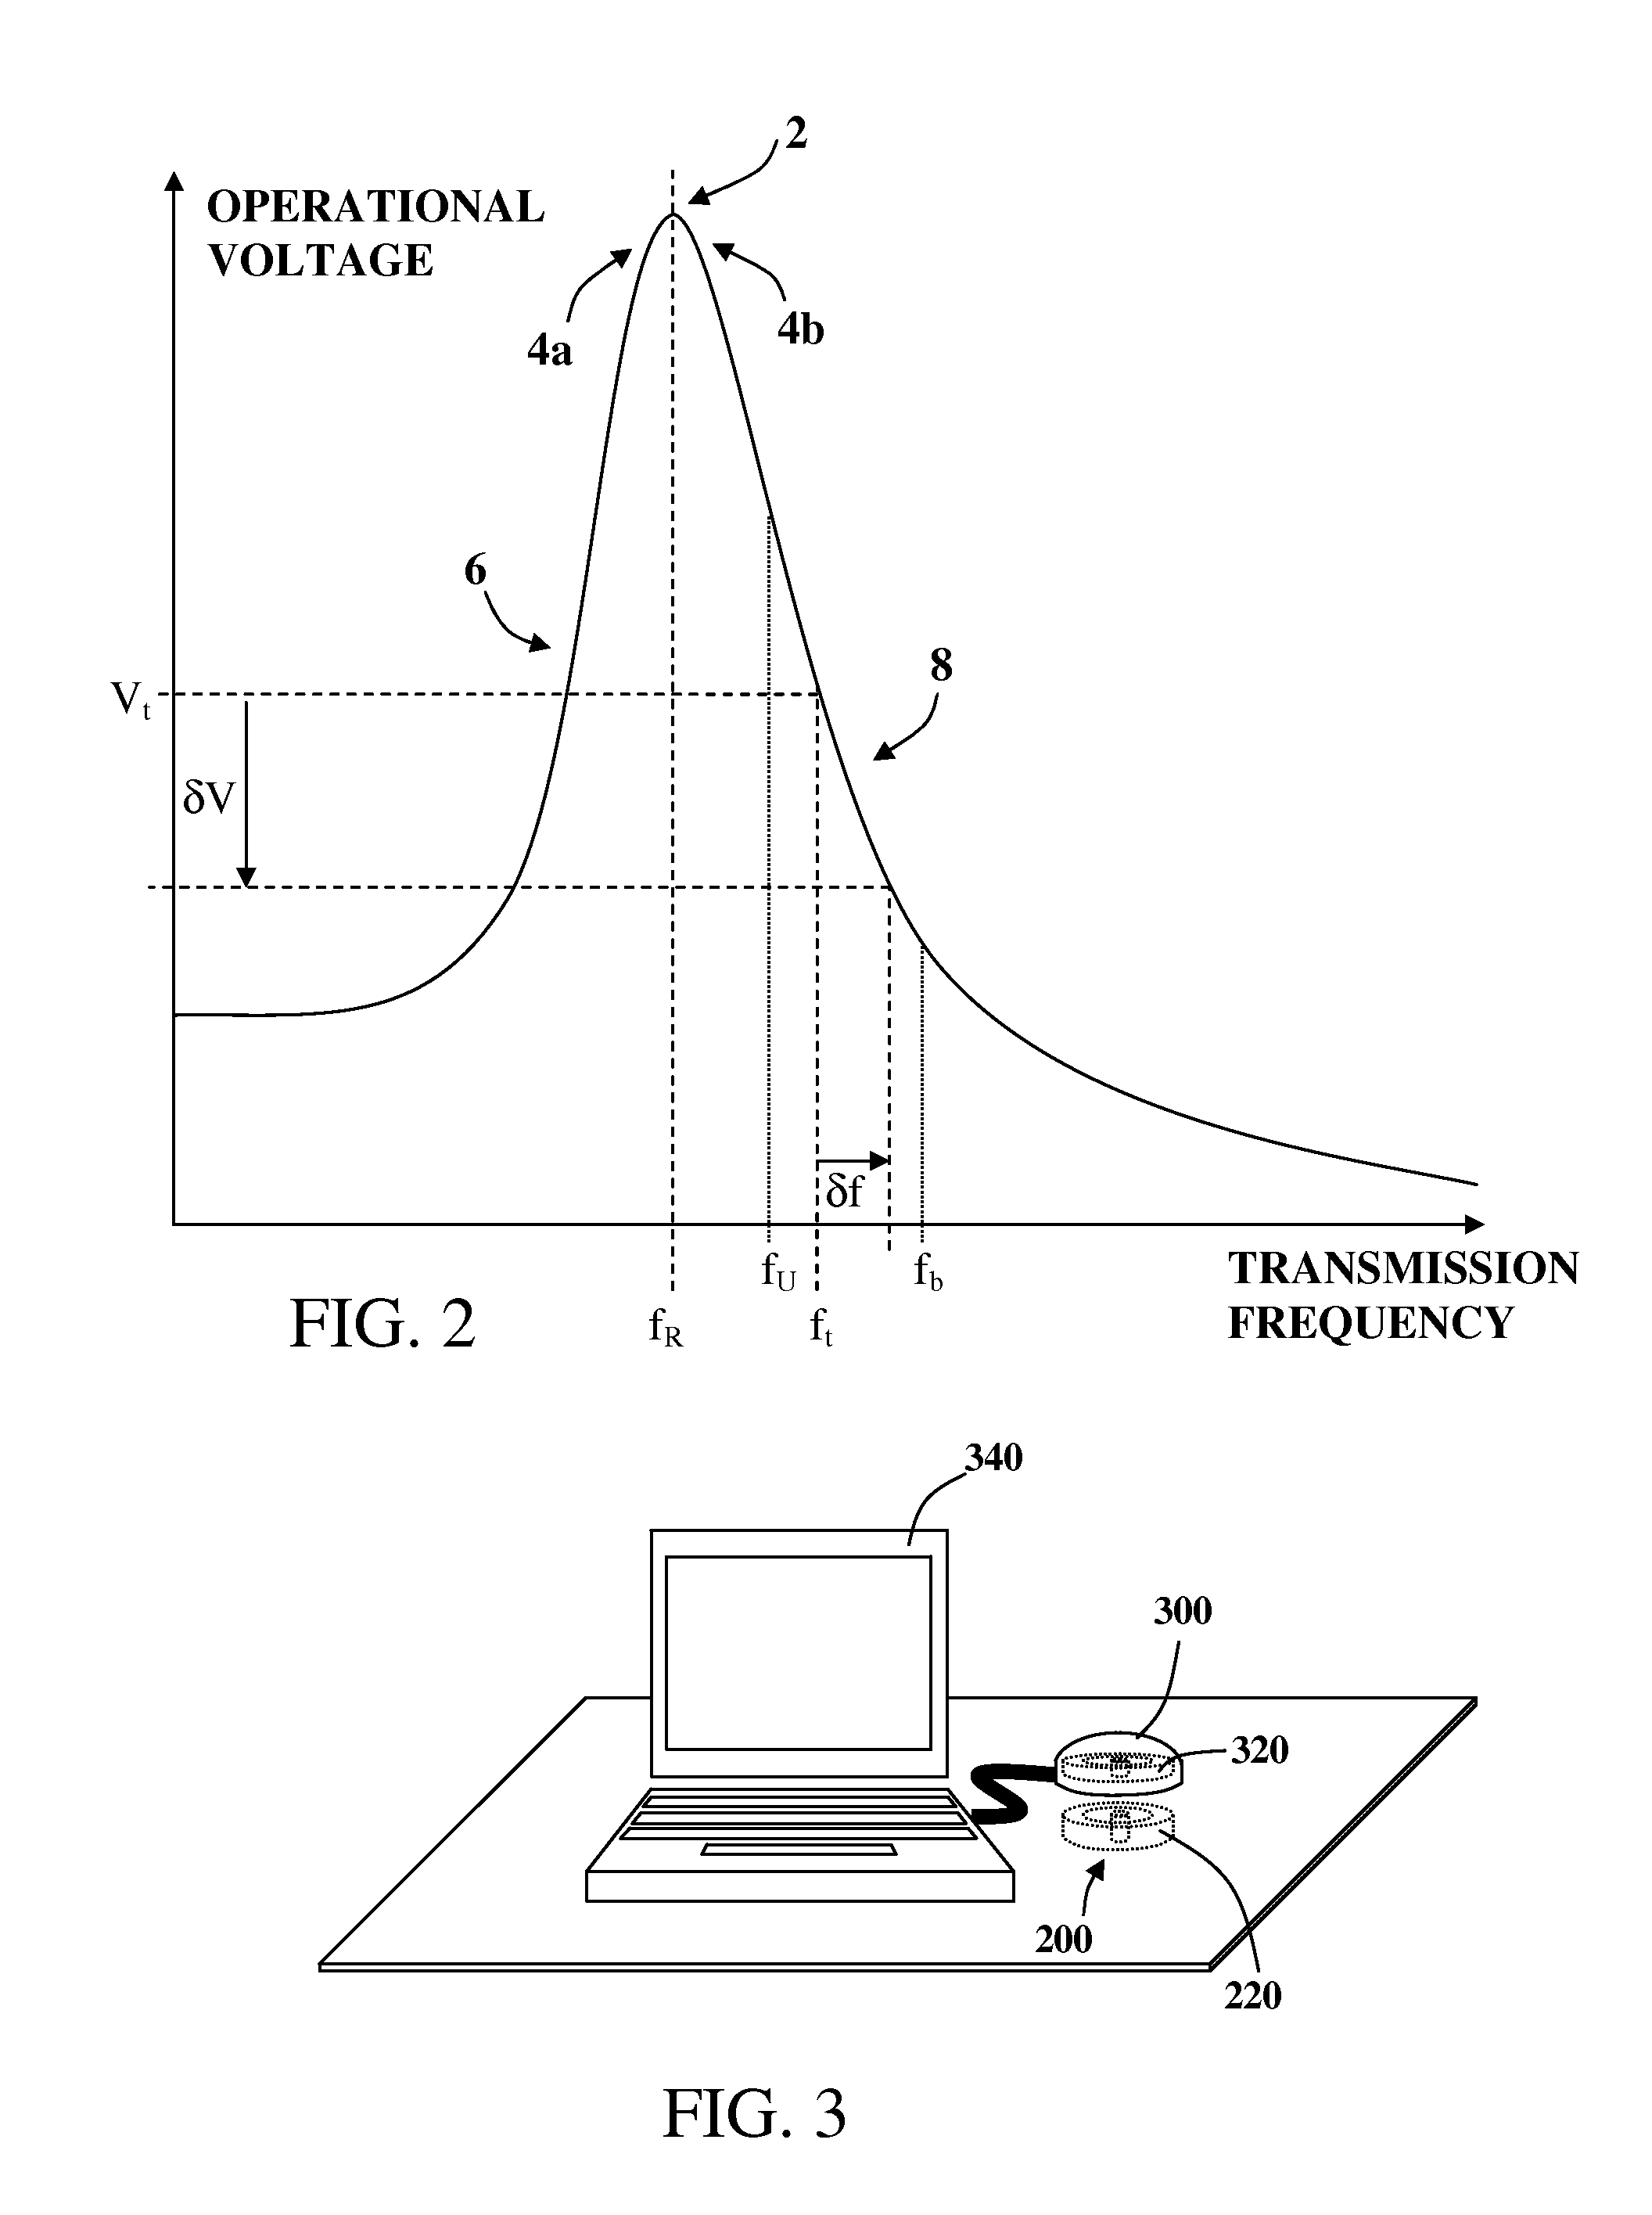 Inductive power transmission system and method for concurrently transmitting digital messages